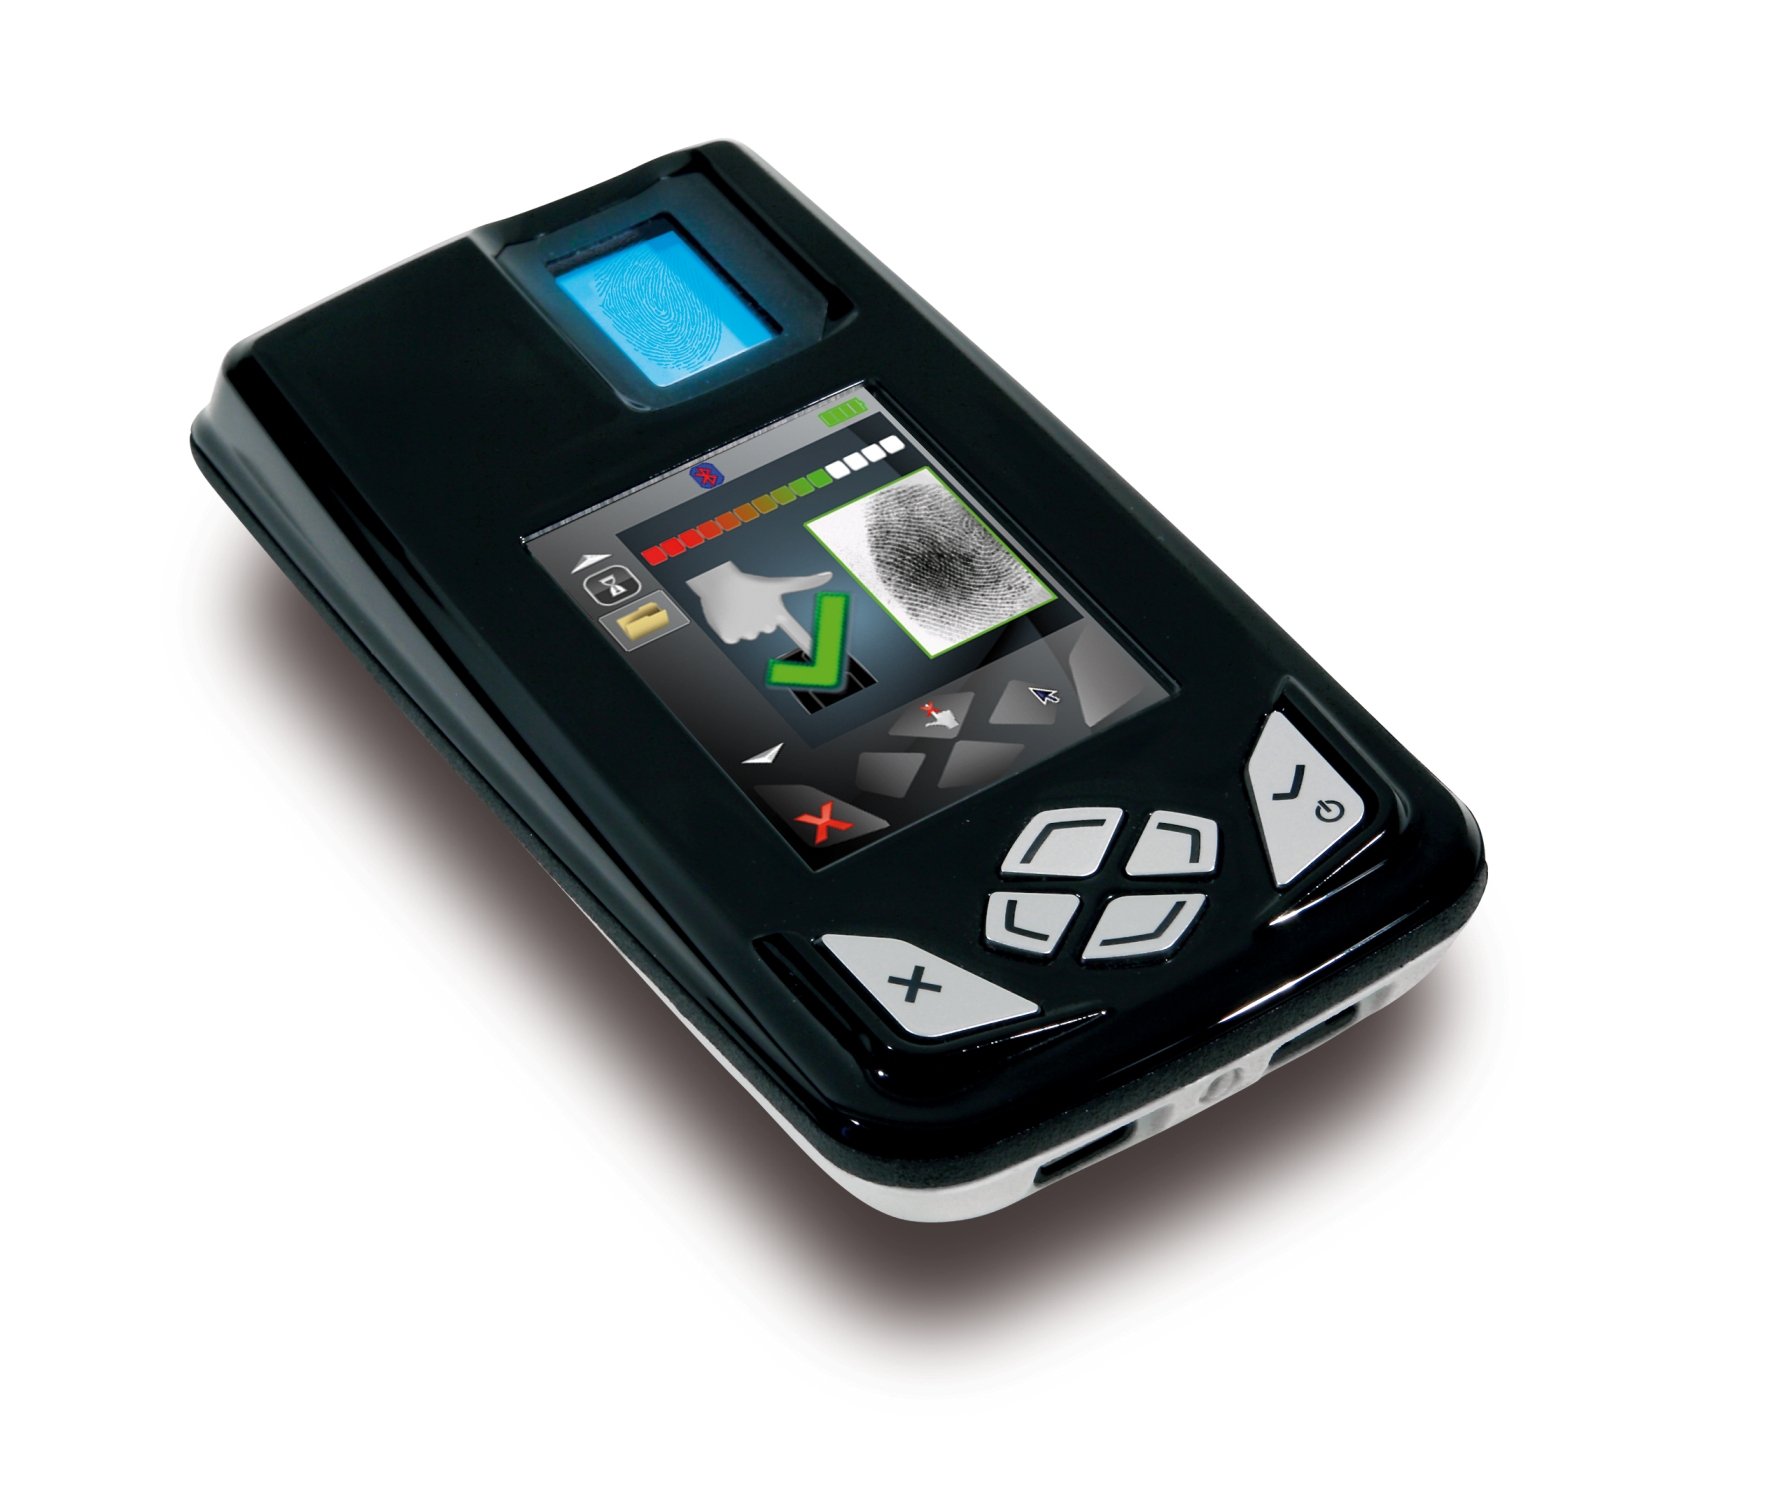 MorphoIDent handheld mobile ID device